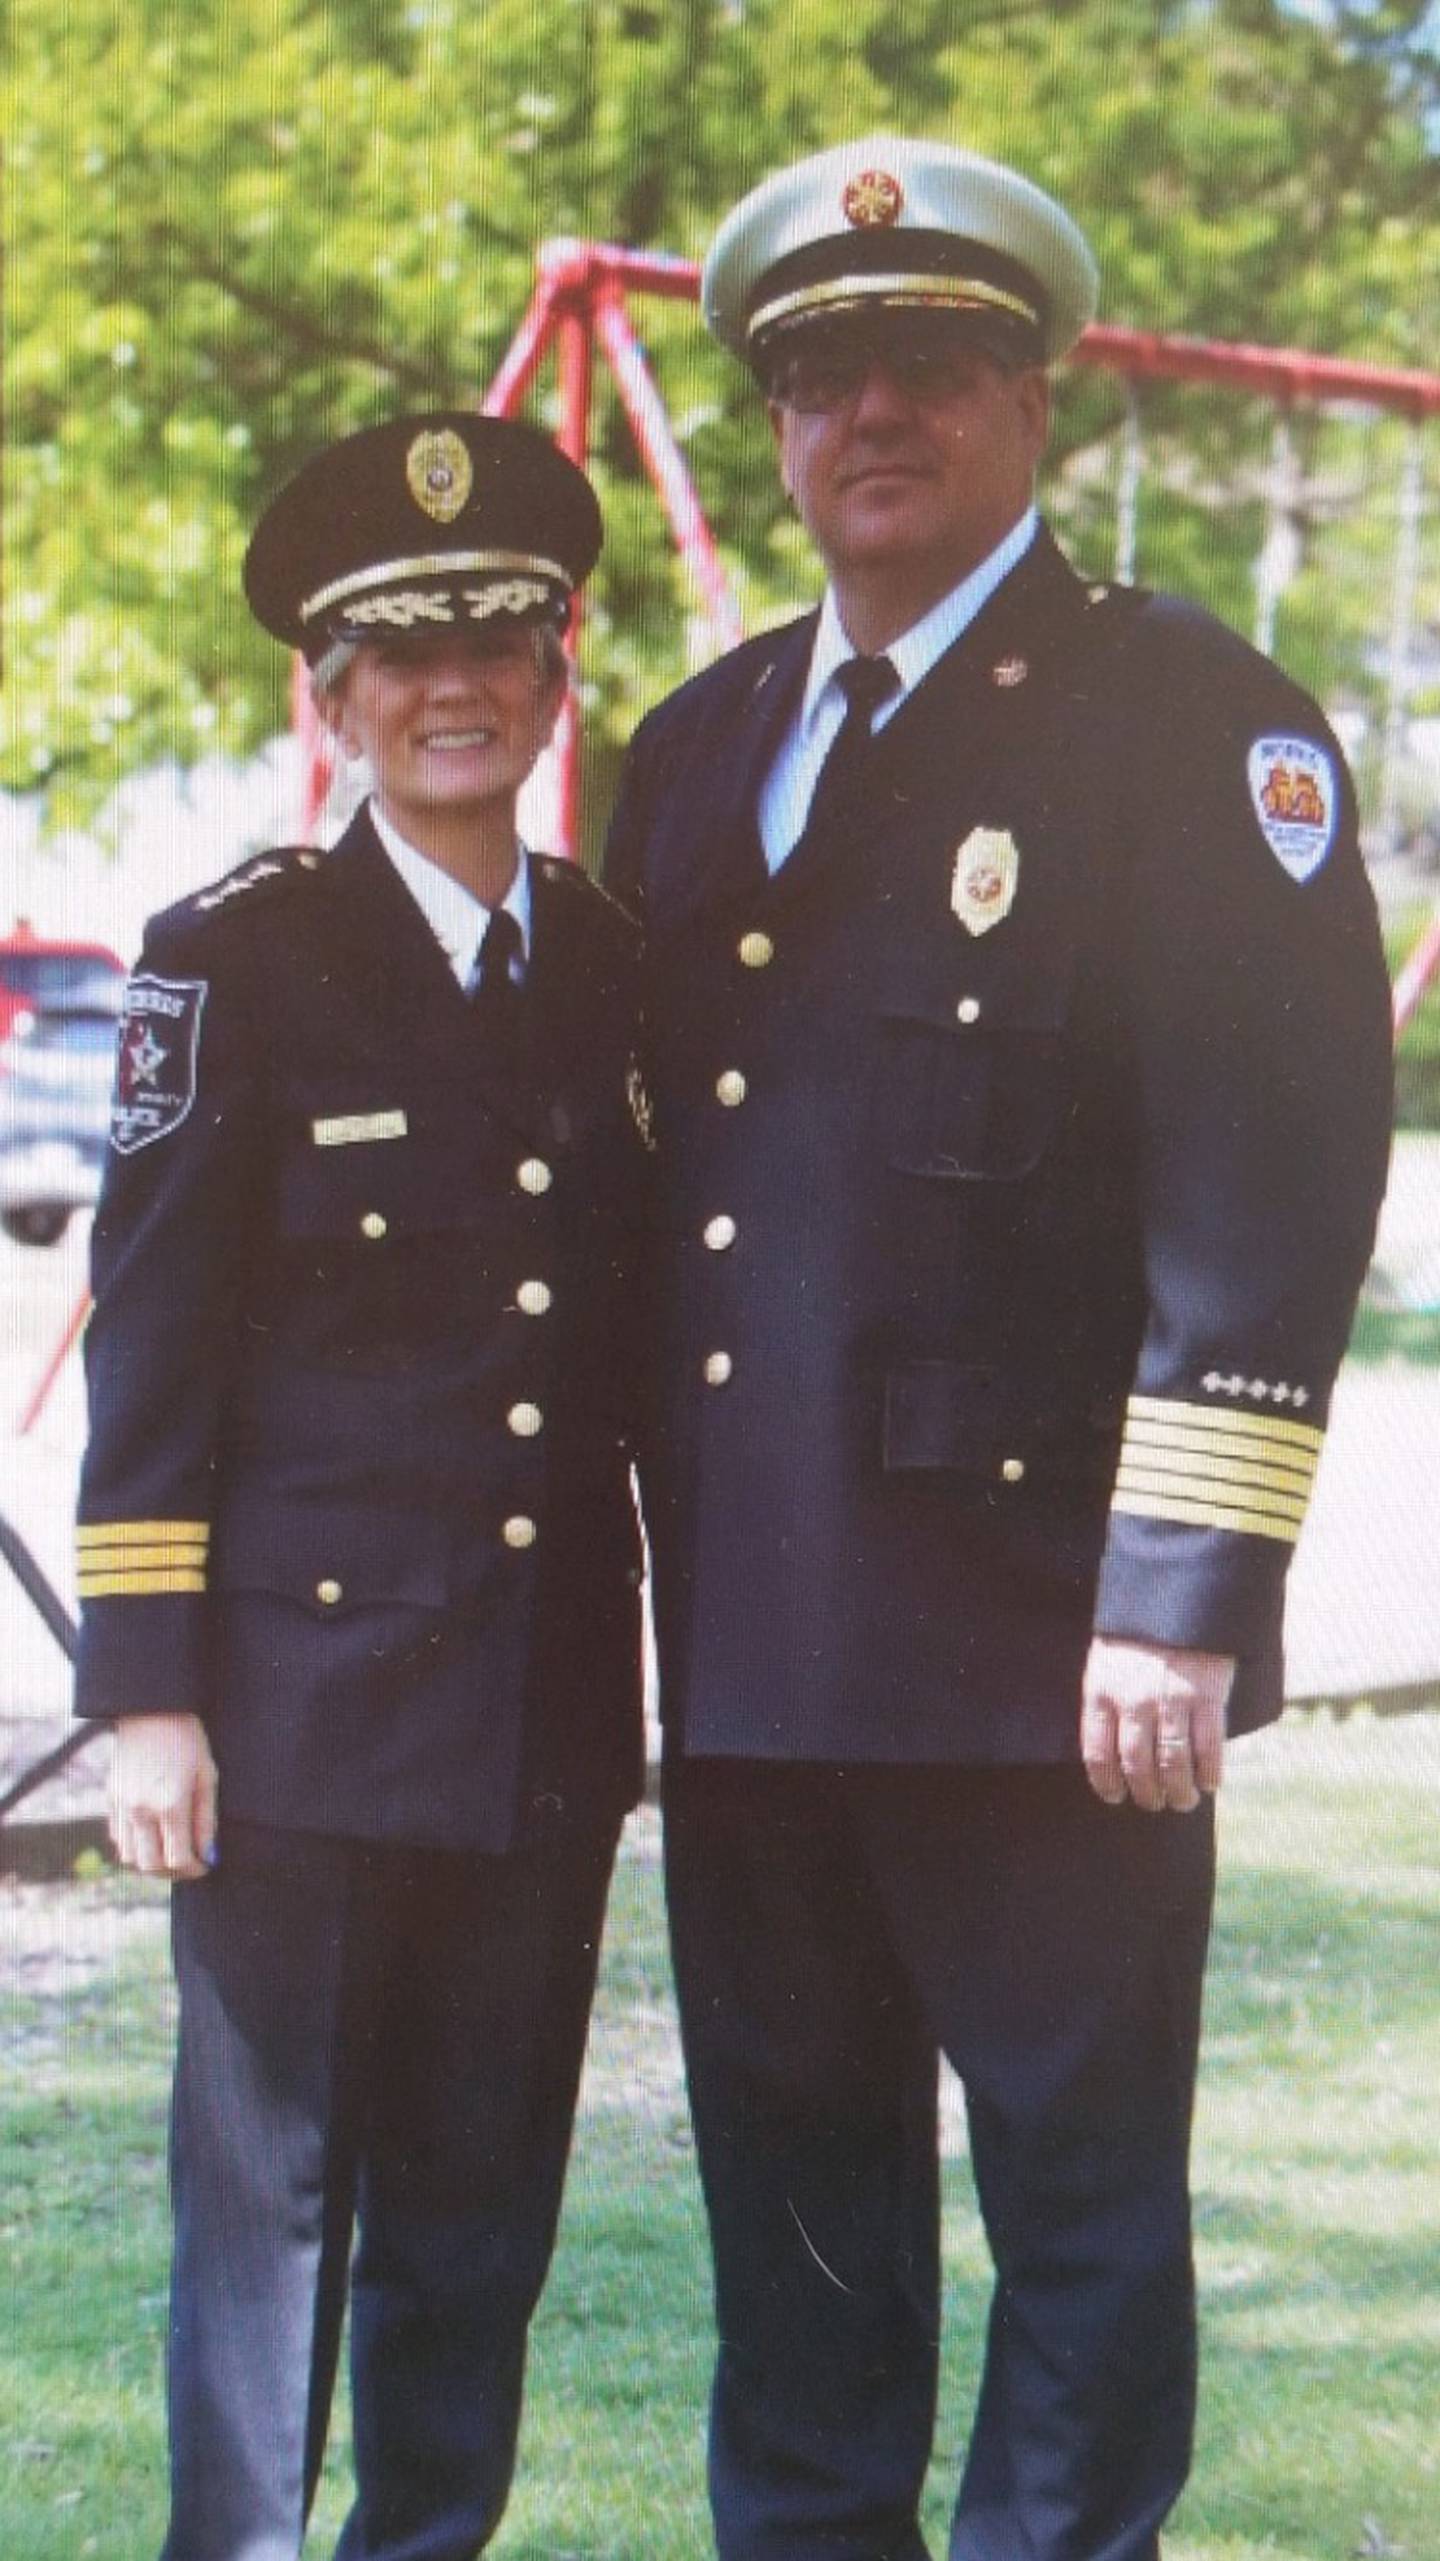 Chief of Police Alicia Steffes and her husband Fire Chief Tracey Steffes.